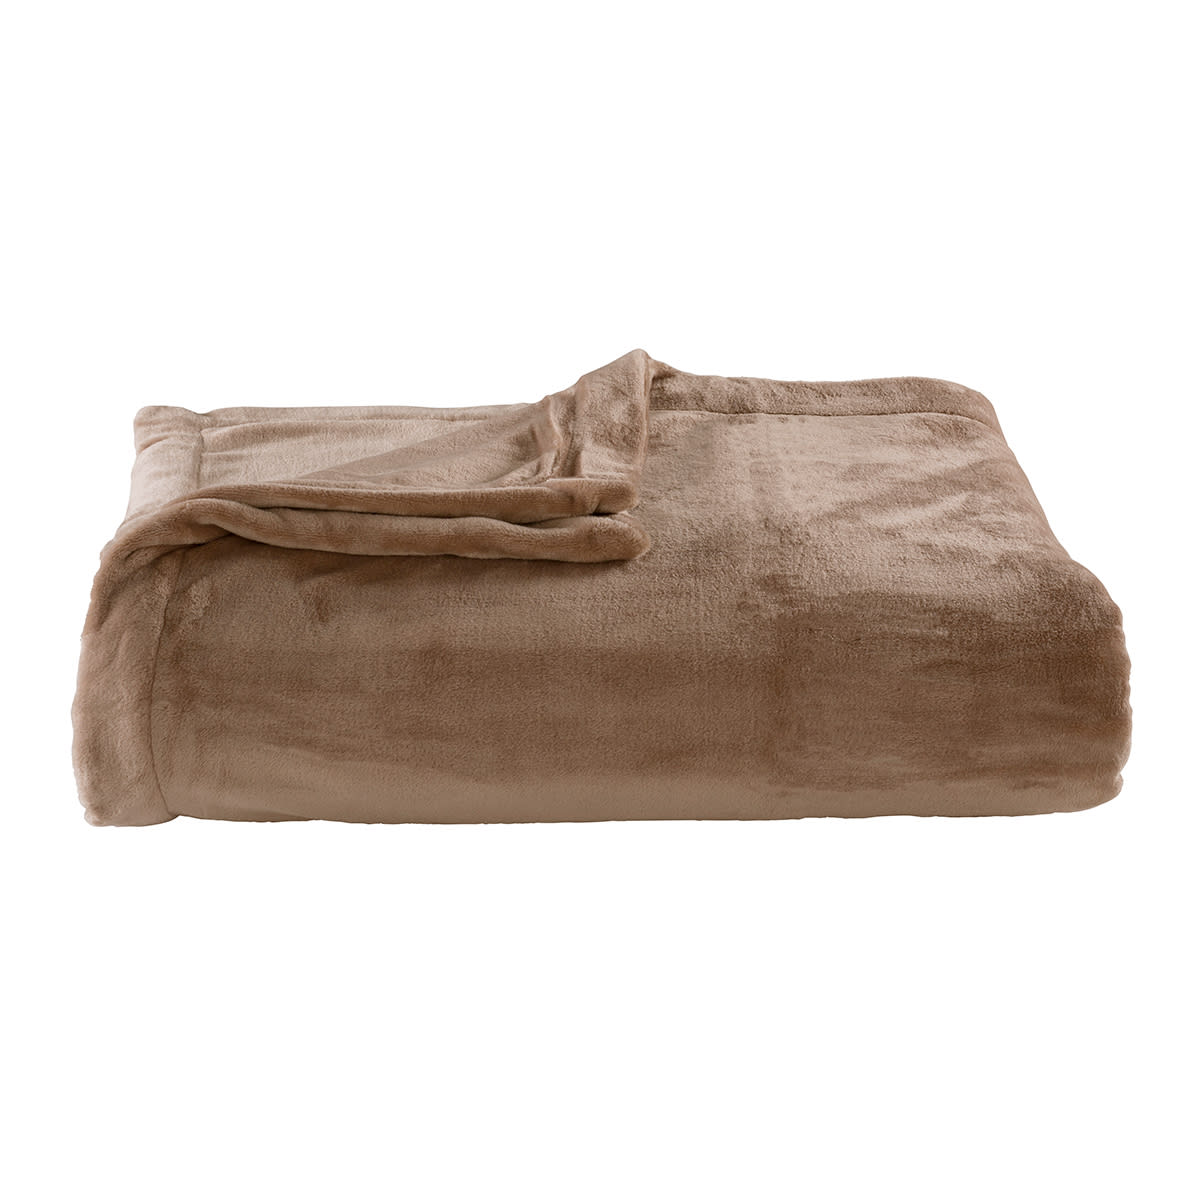 Couverture polaire Teddy en polyester uni Taupe 240x260 - Toison d'Or